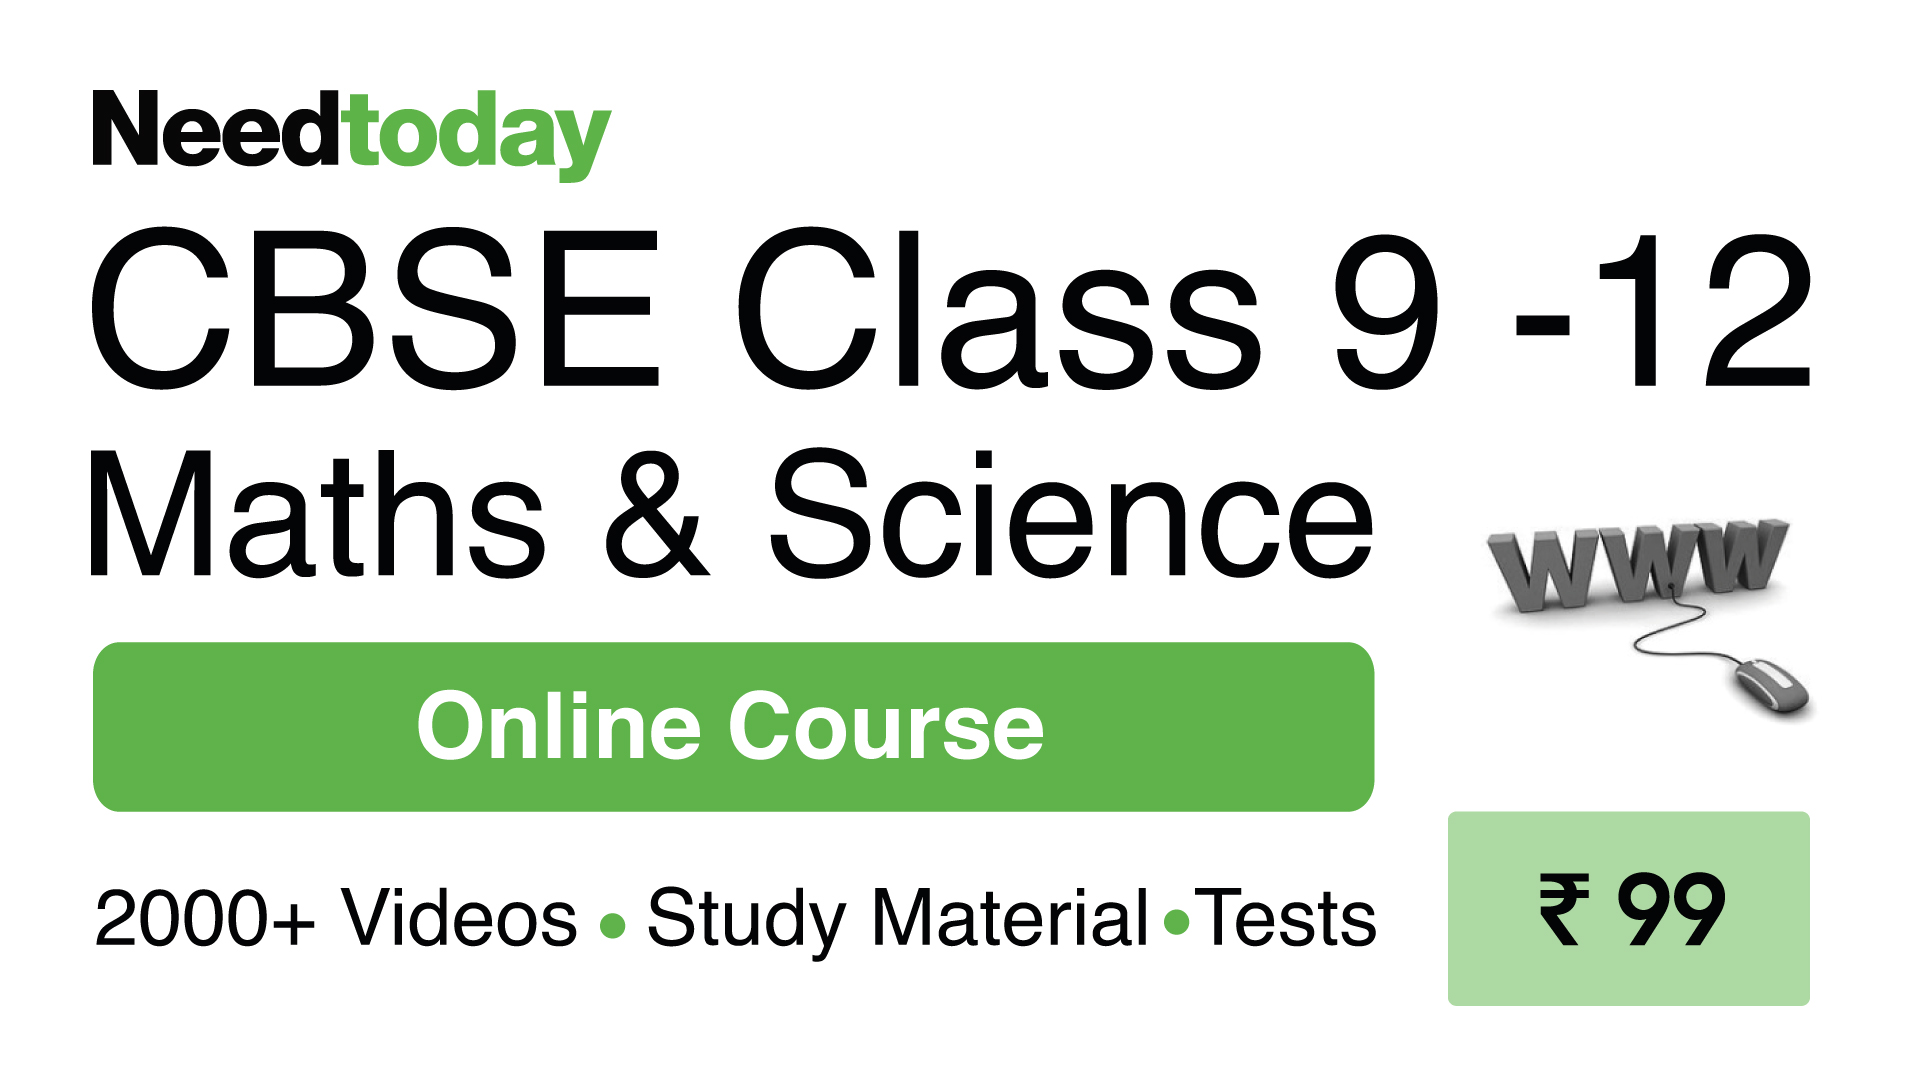 CBSE 9 - 12 Maths and Science Online Course